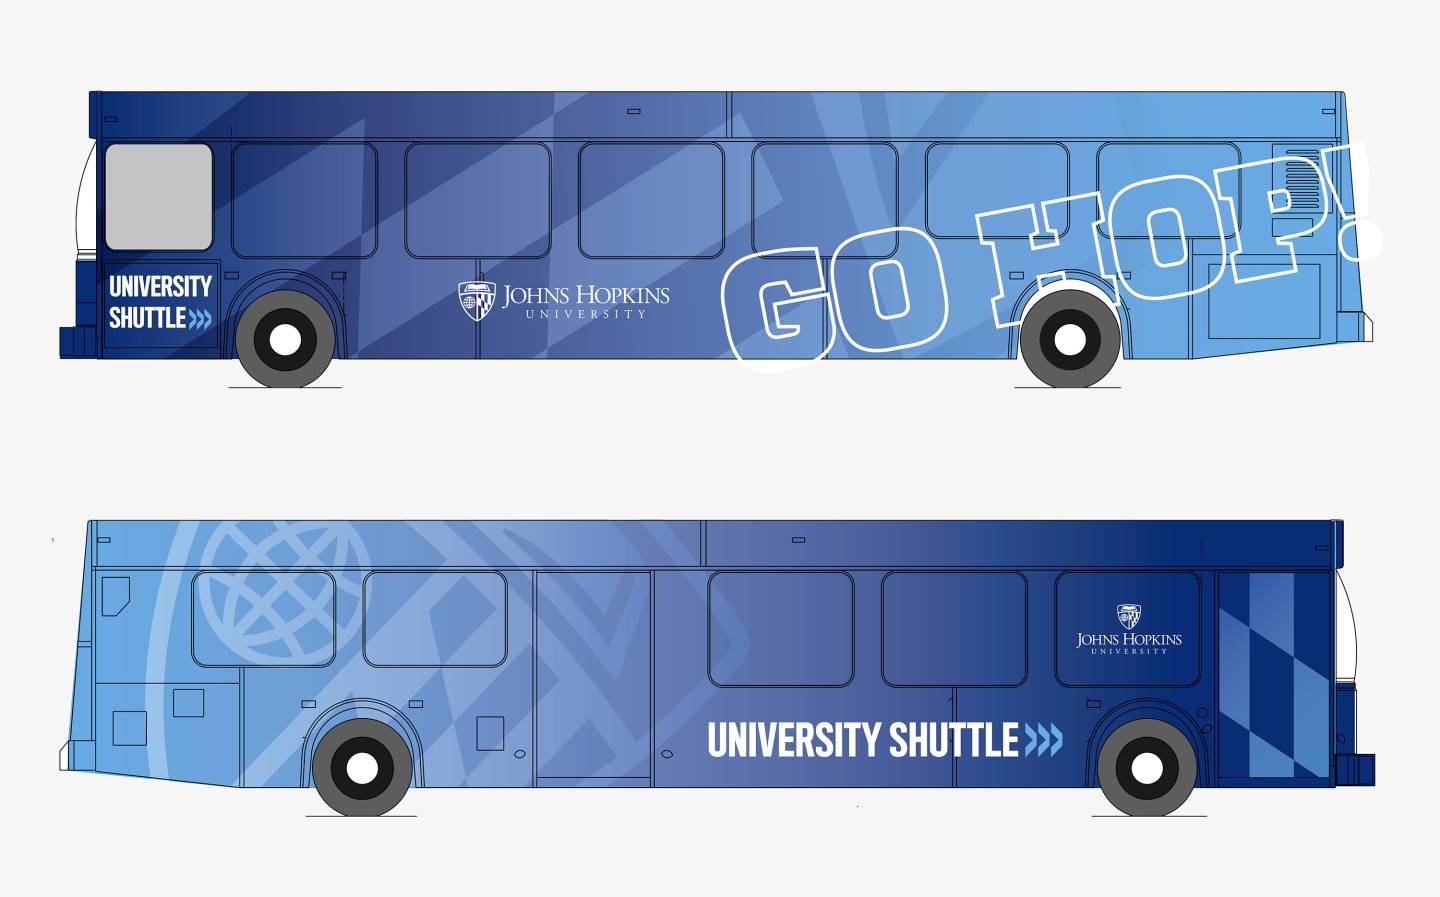 Conceptual designs of new Johns Hopkins shuttle buses